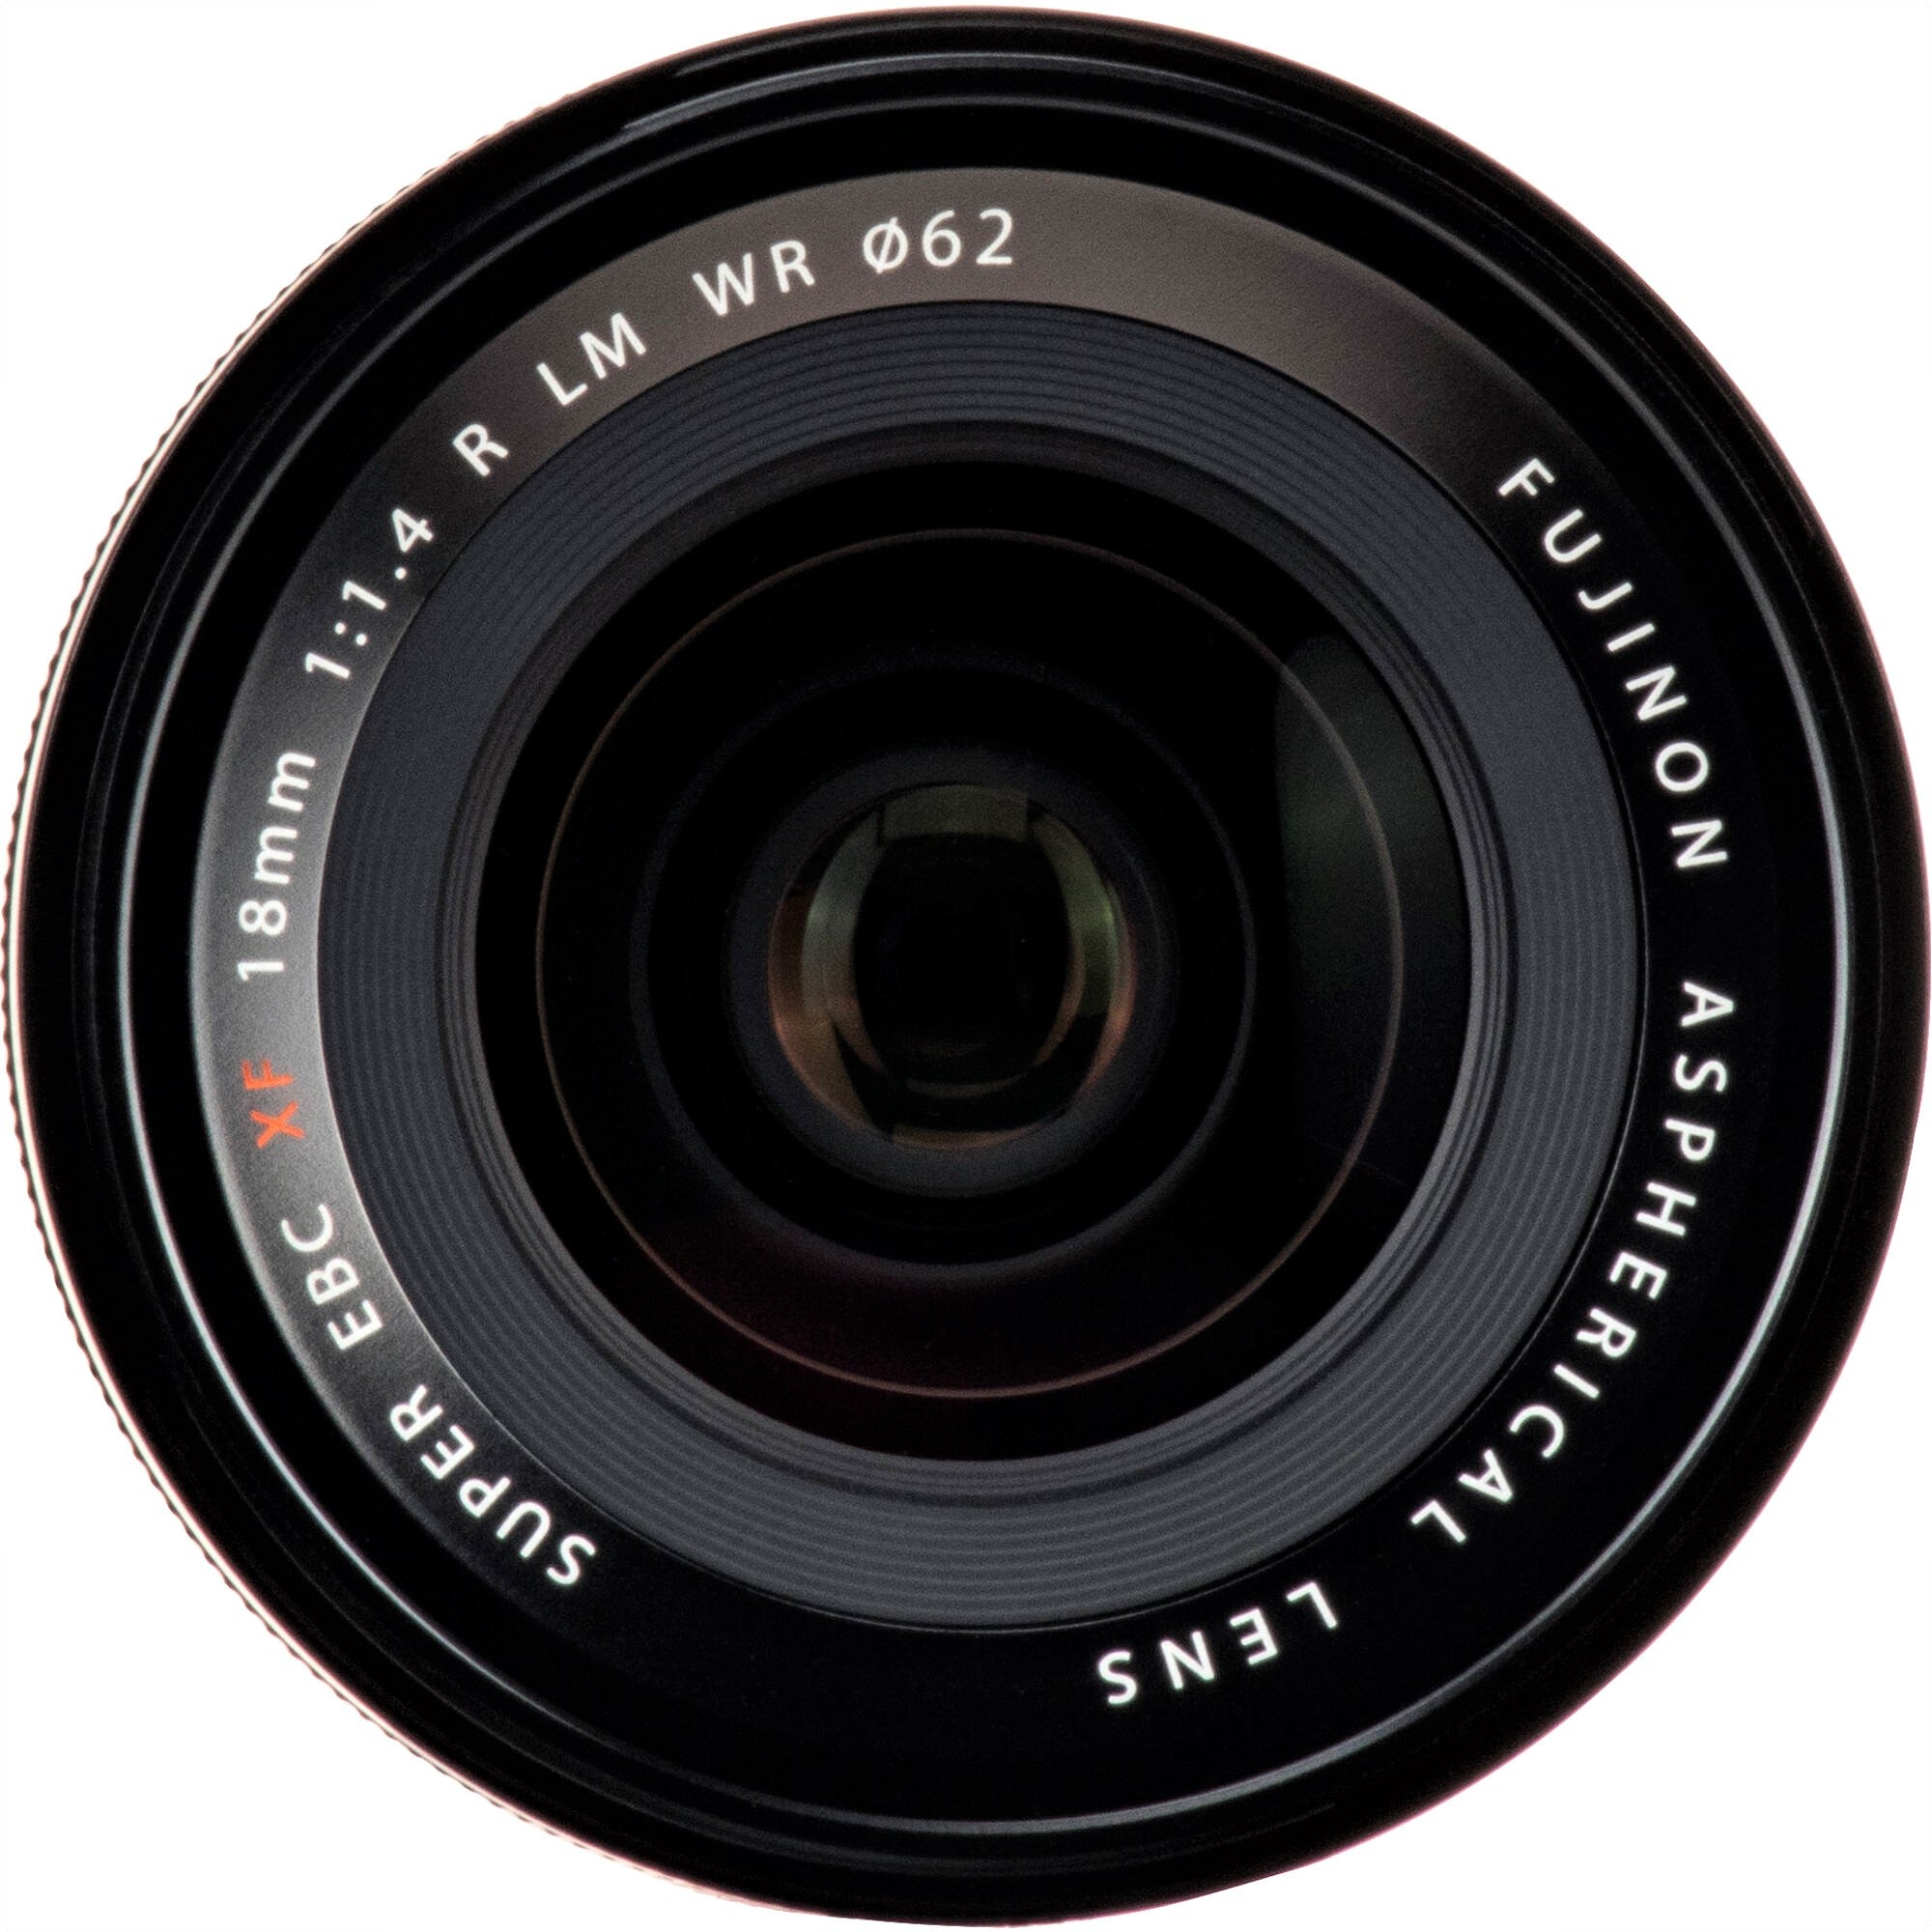 Fujifilm XF 18mm f/1.4 R LM WR Lens - Front View